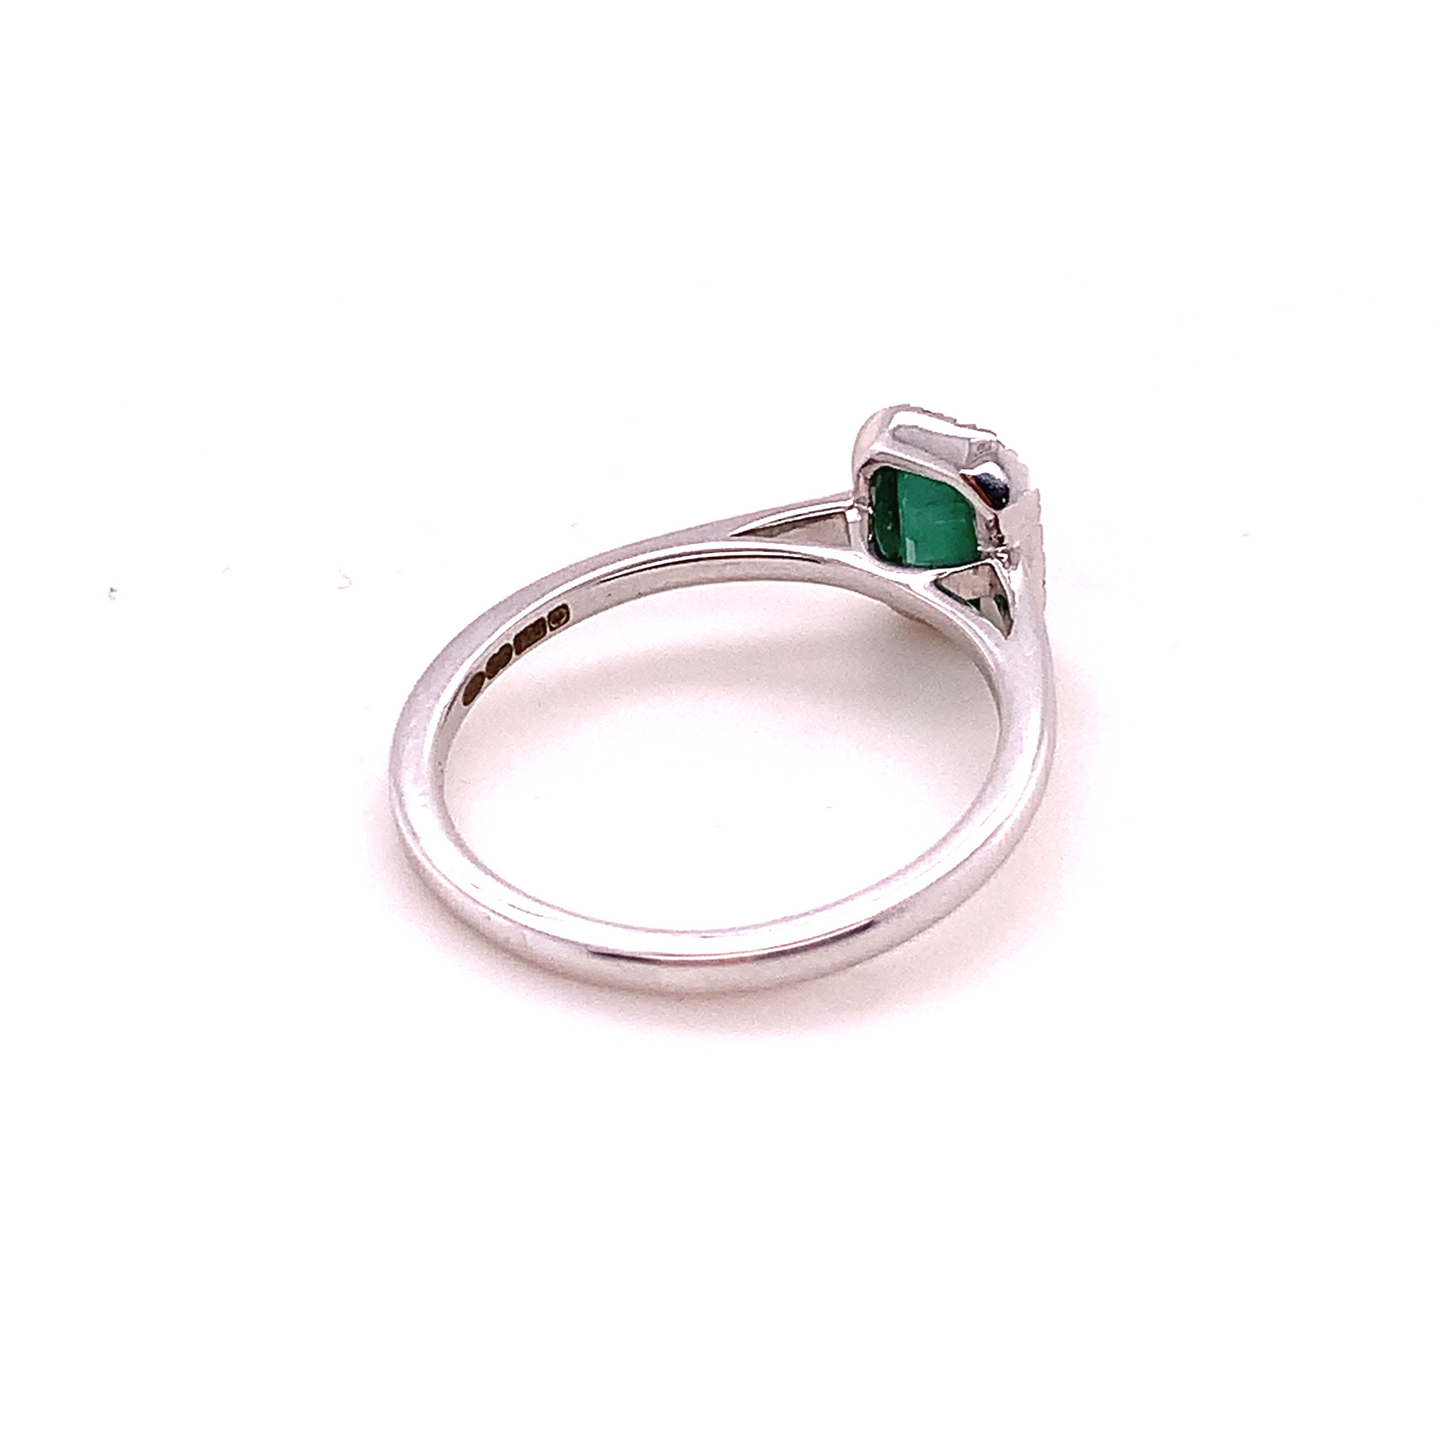 9K White Gold Emerald and Diamond Halo Ring